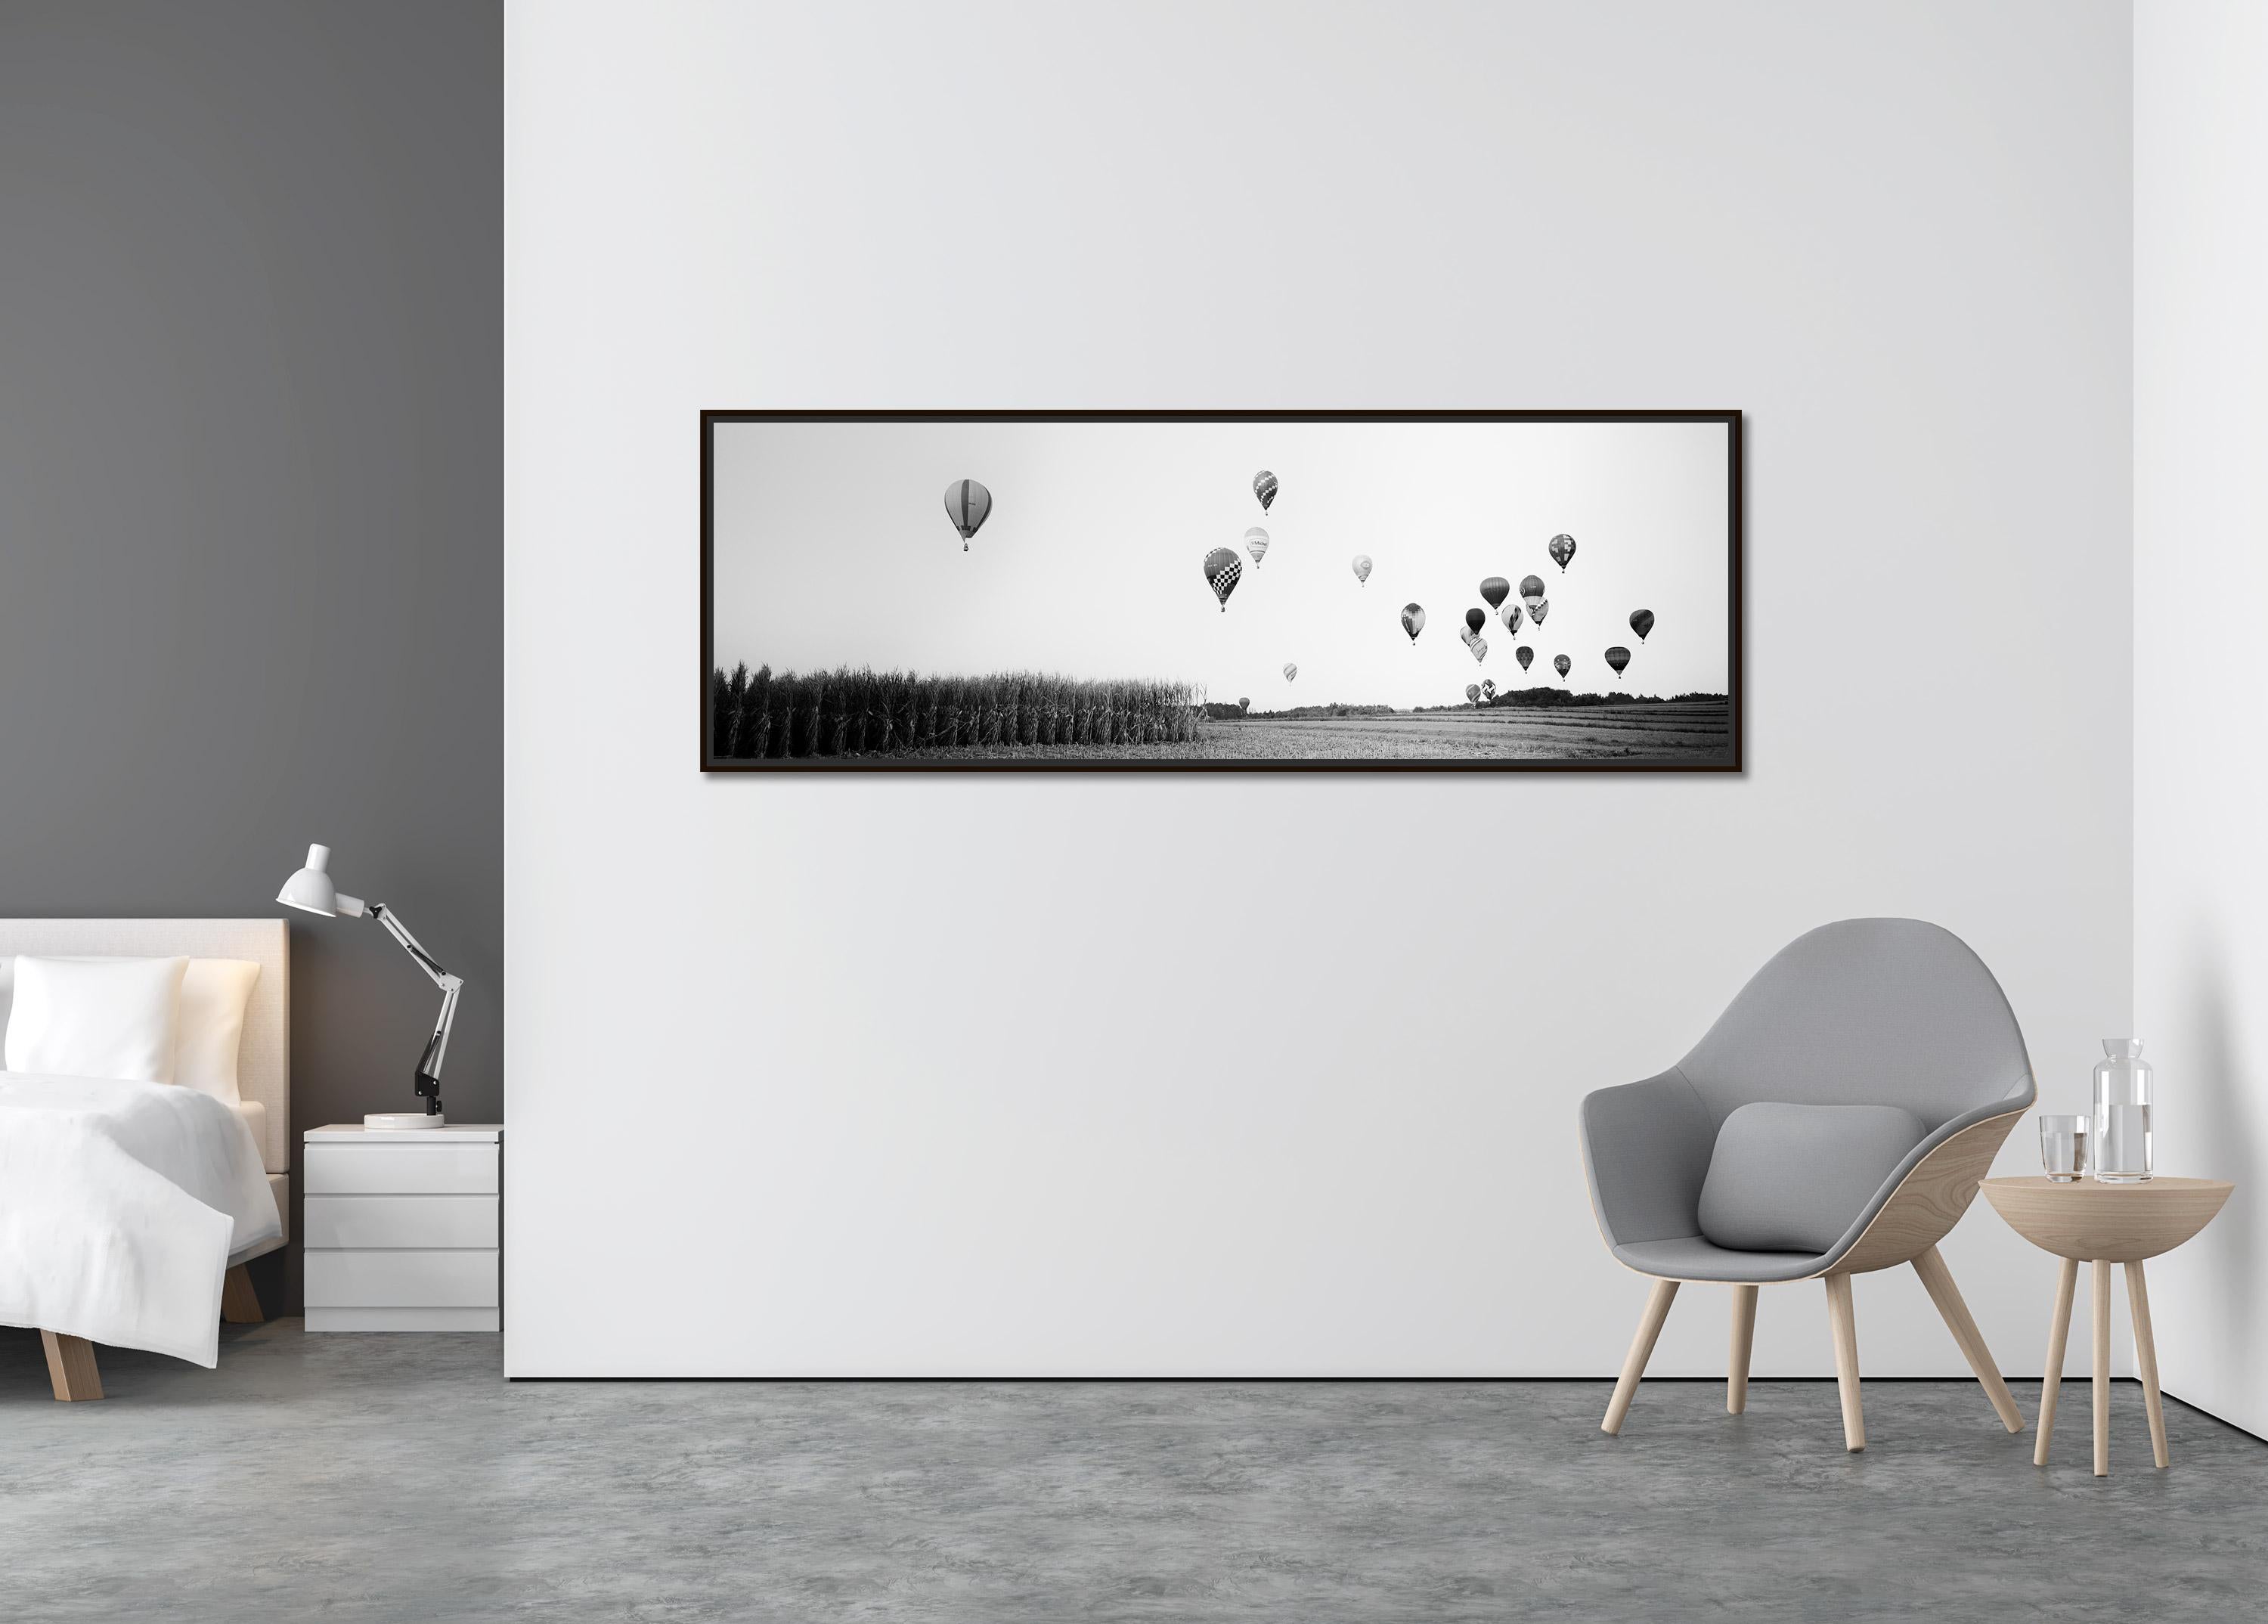 Hot Air Balloon Panorama, Championship, black and white photography, landscape - Contemporary Photograph by Gerald Berghammer